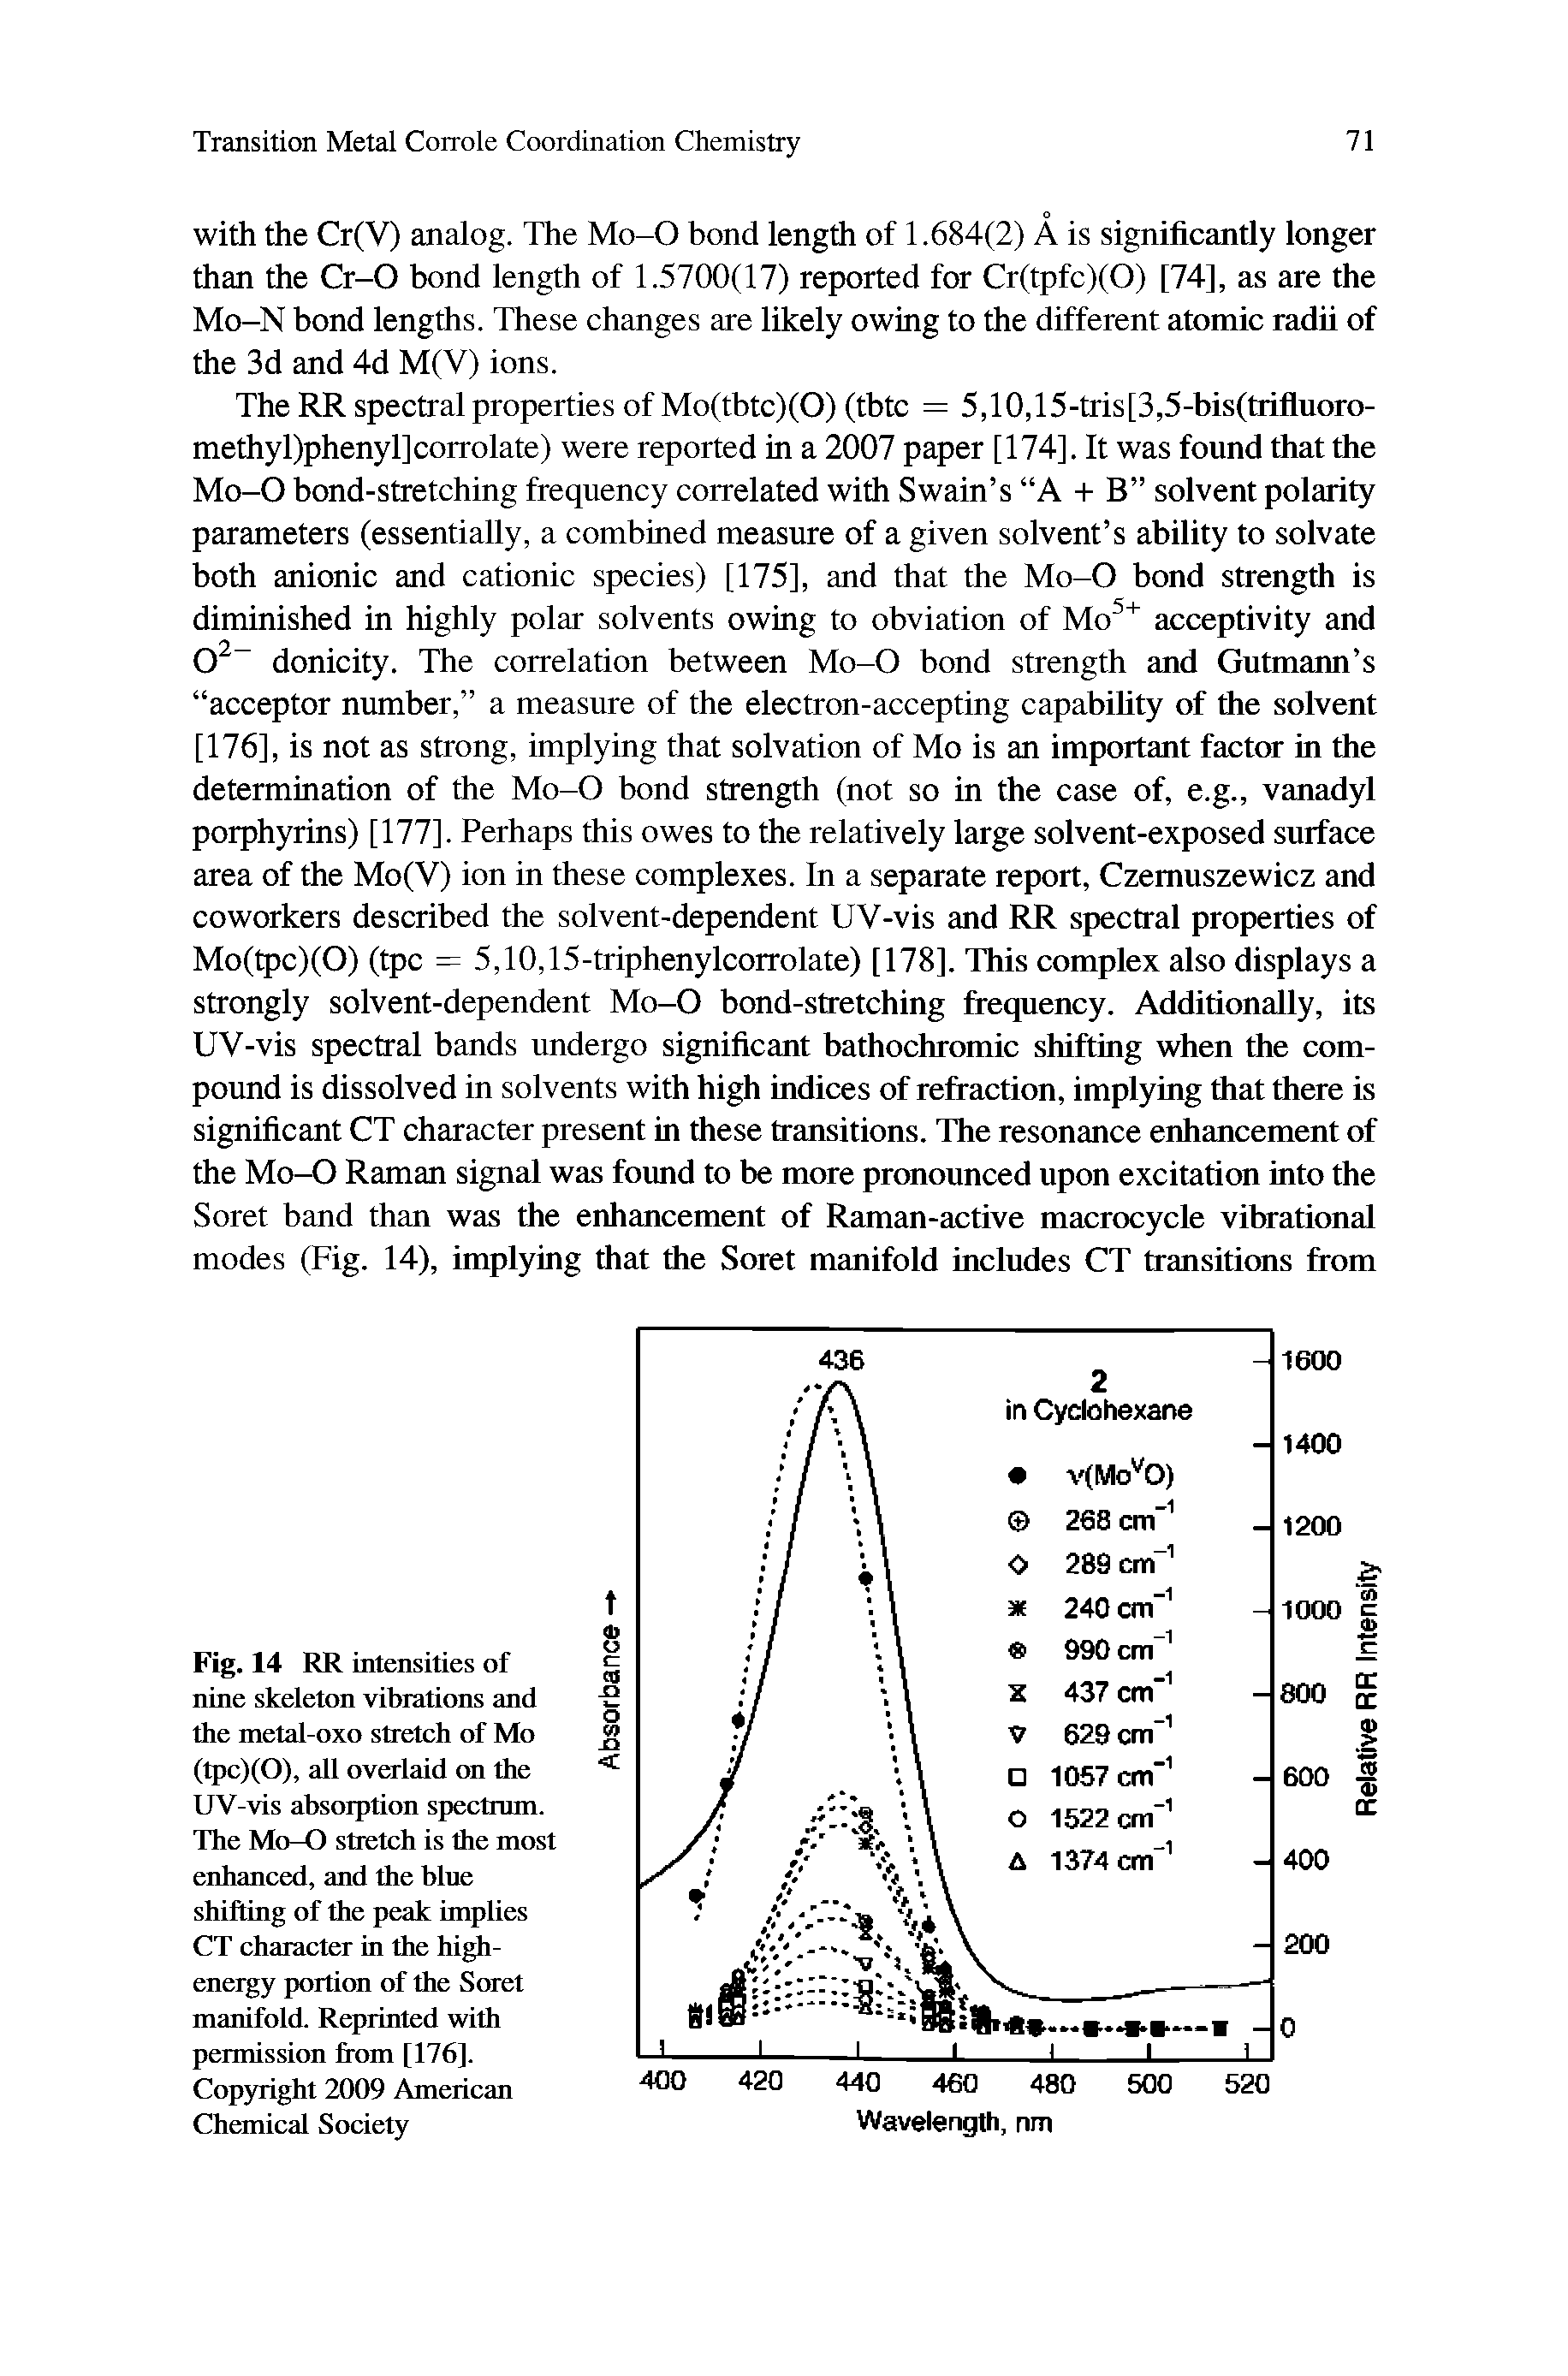 Fig. 14 RR intensities of nine skeleton vibrations and the metal-oxo stretch of Mo (tpc)(0), all overlaid on the UV-vis absorption spectrum. The Mo-O stretch is the most enhanced, and the blue shifting of the peak implies CT character in the high-energy portion of the Soret manifold. Reprinted with permission from [176]. Copyright 2009 American Chemical Society...